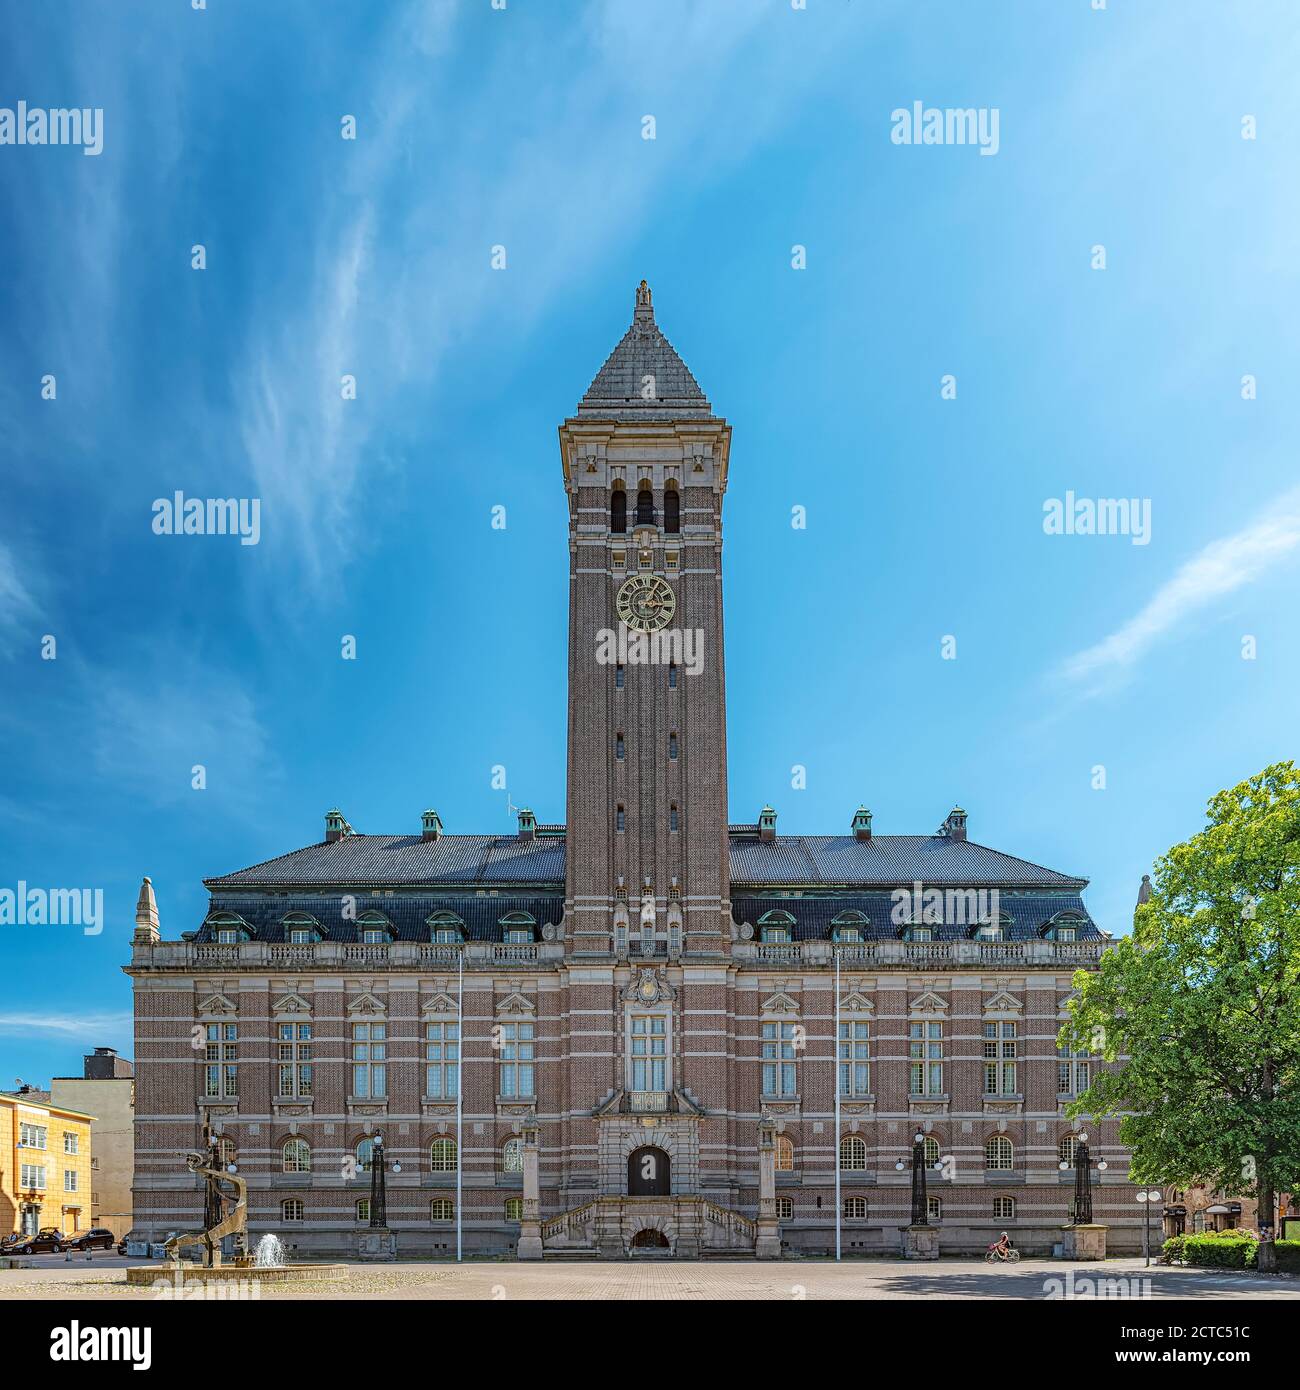 NORRKOPING, SWEDEN - JUNE 13, 2020: The front facade of the citys town hall. Stock Photo